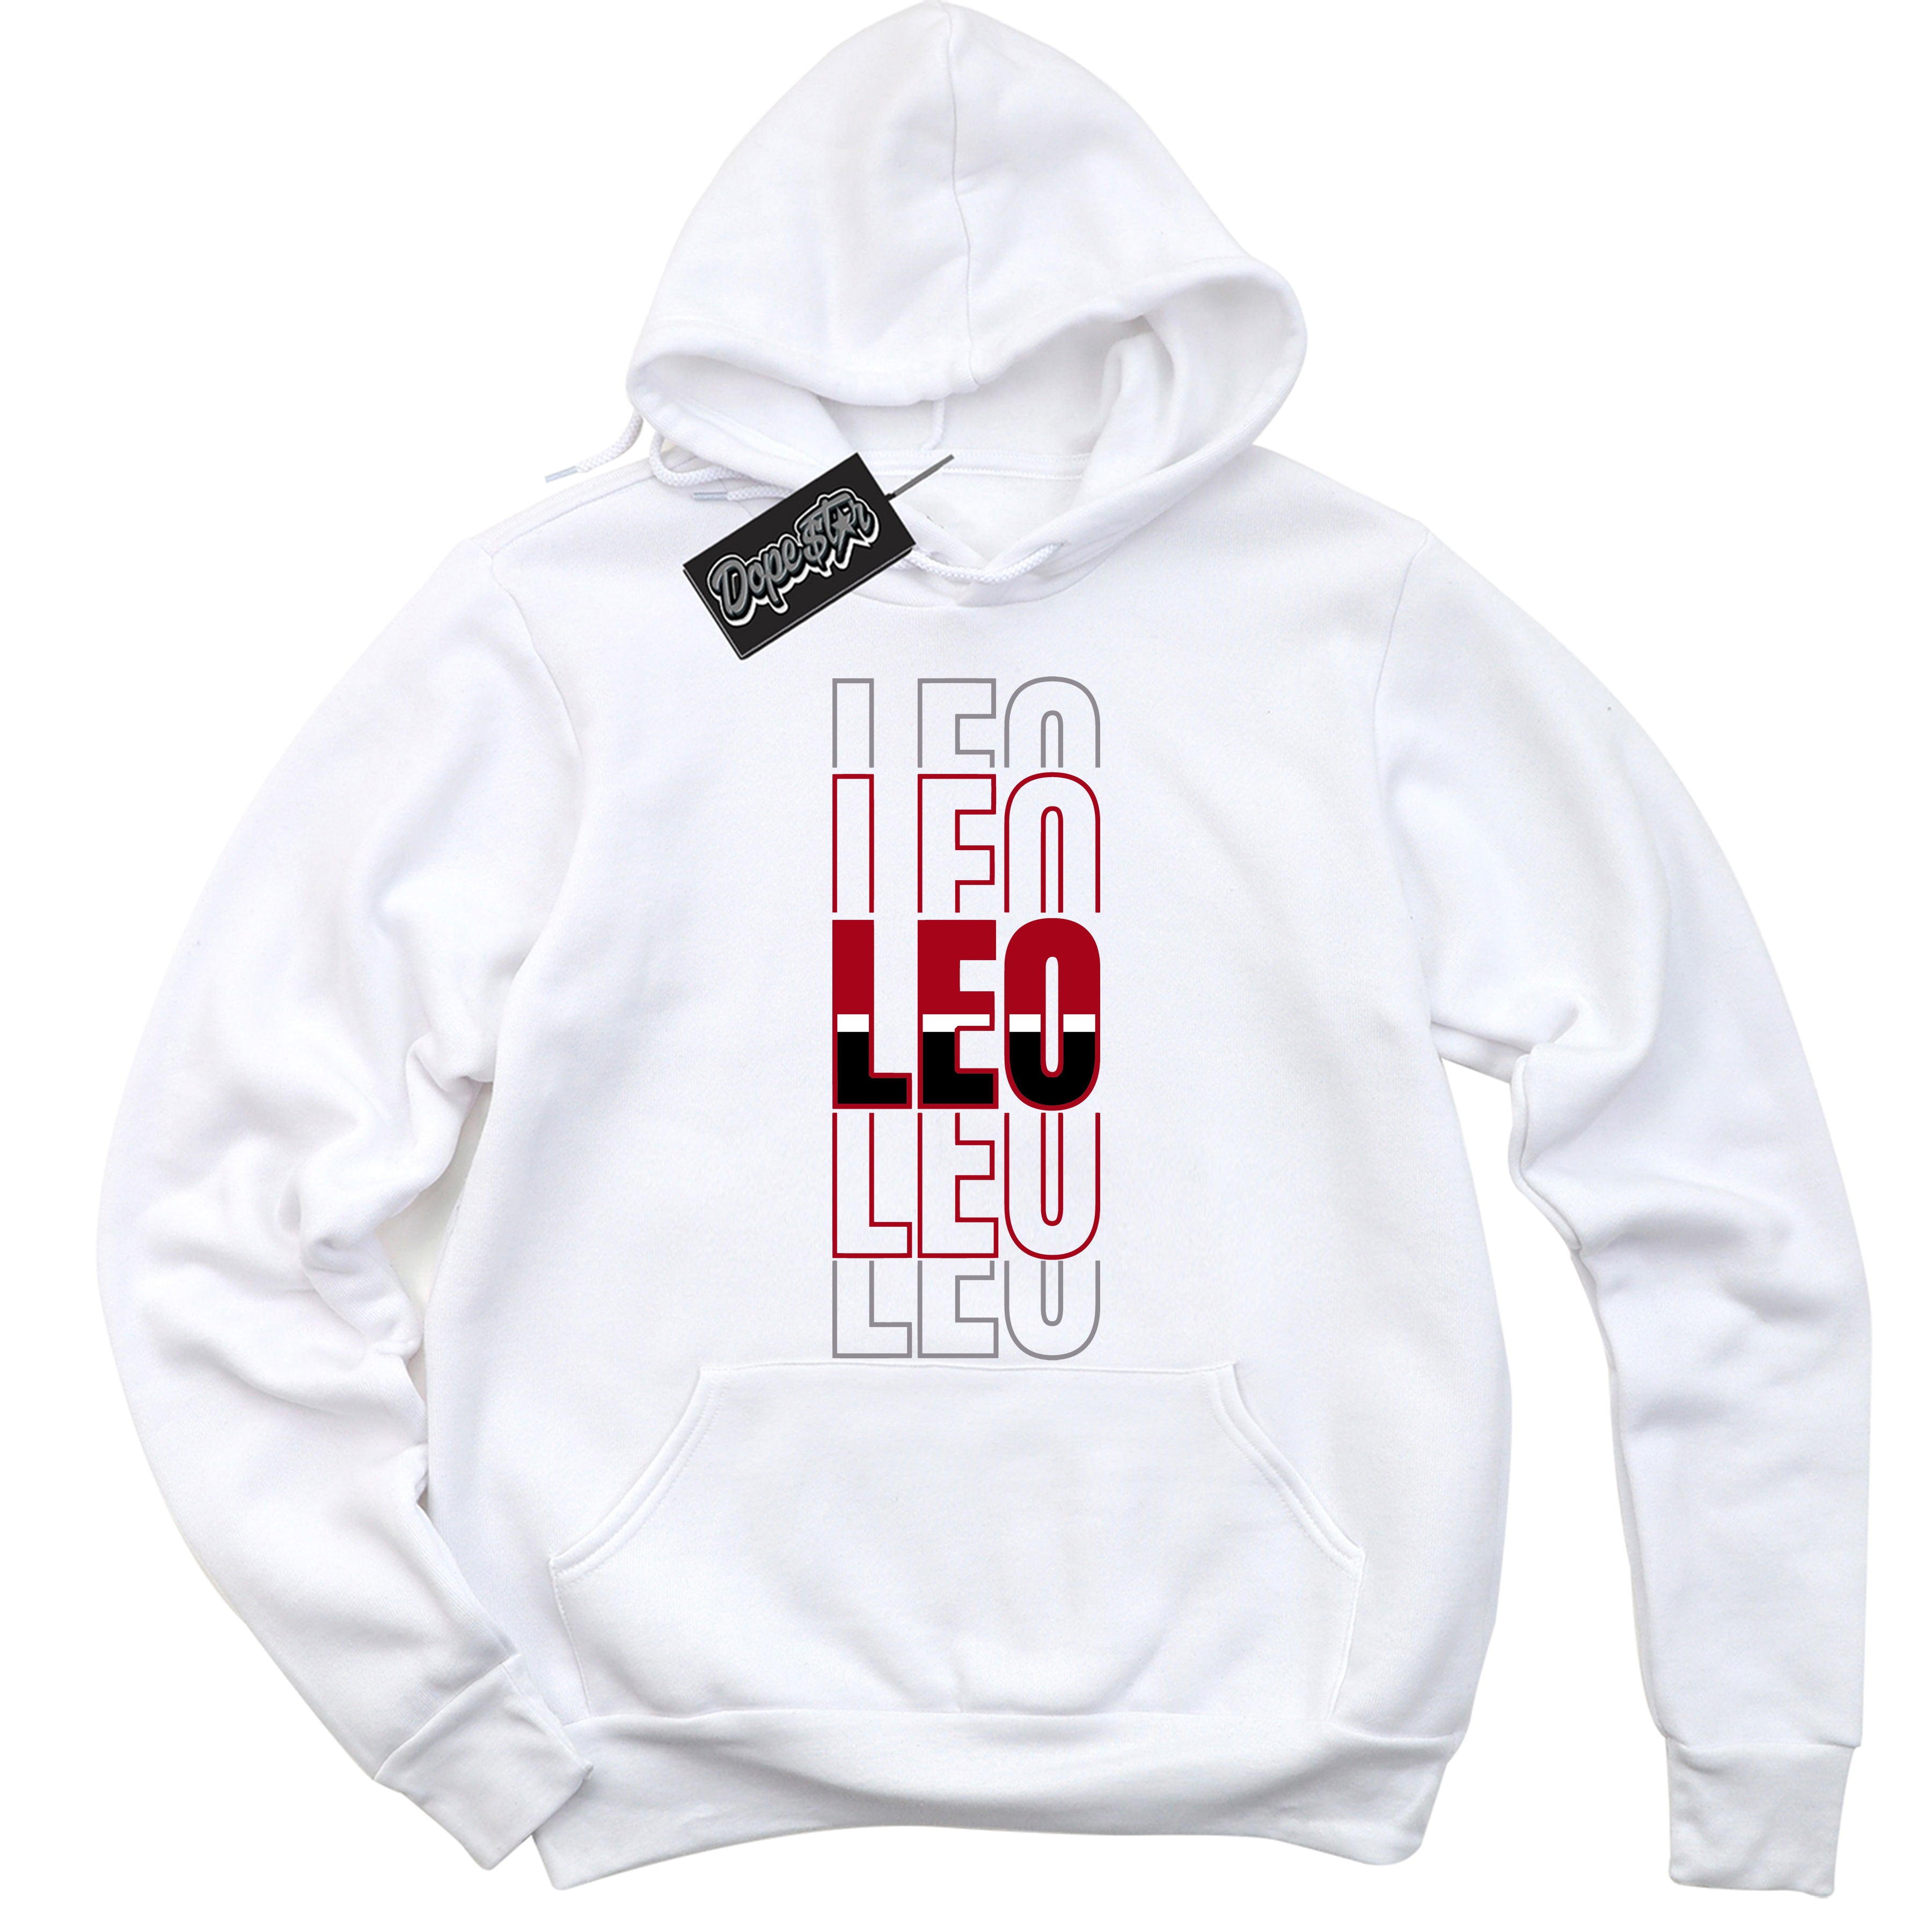 Cool White Hoodie with “ Leo ”  design that Perfectly Matches Bred Reimagined 4s Jordans.